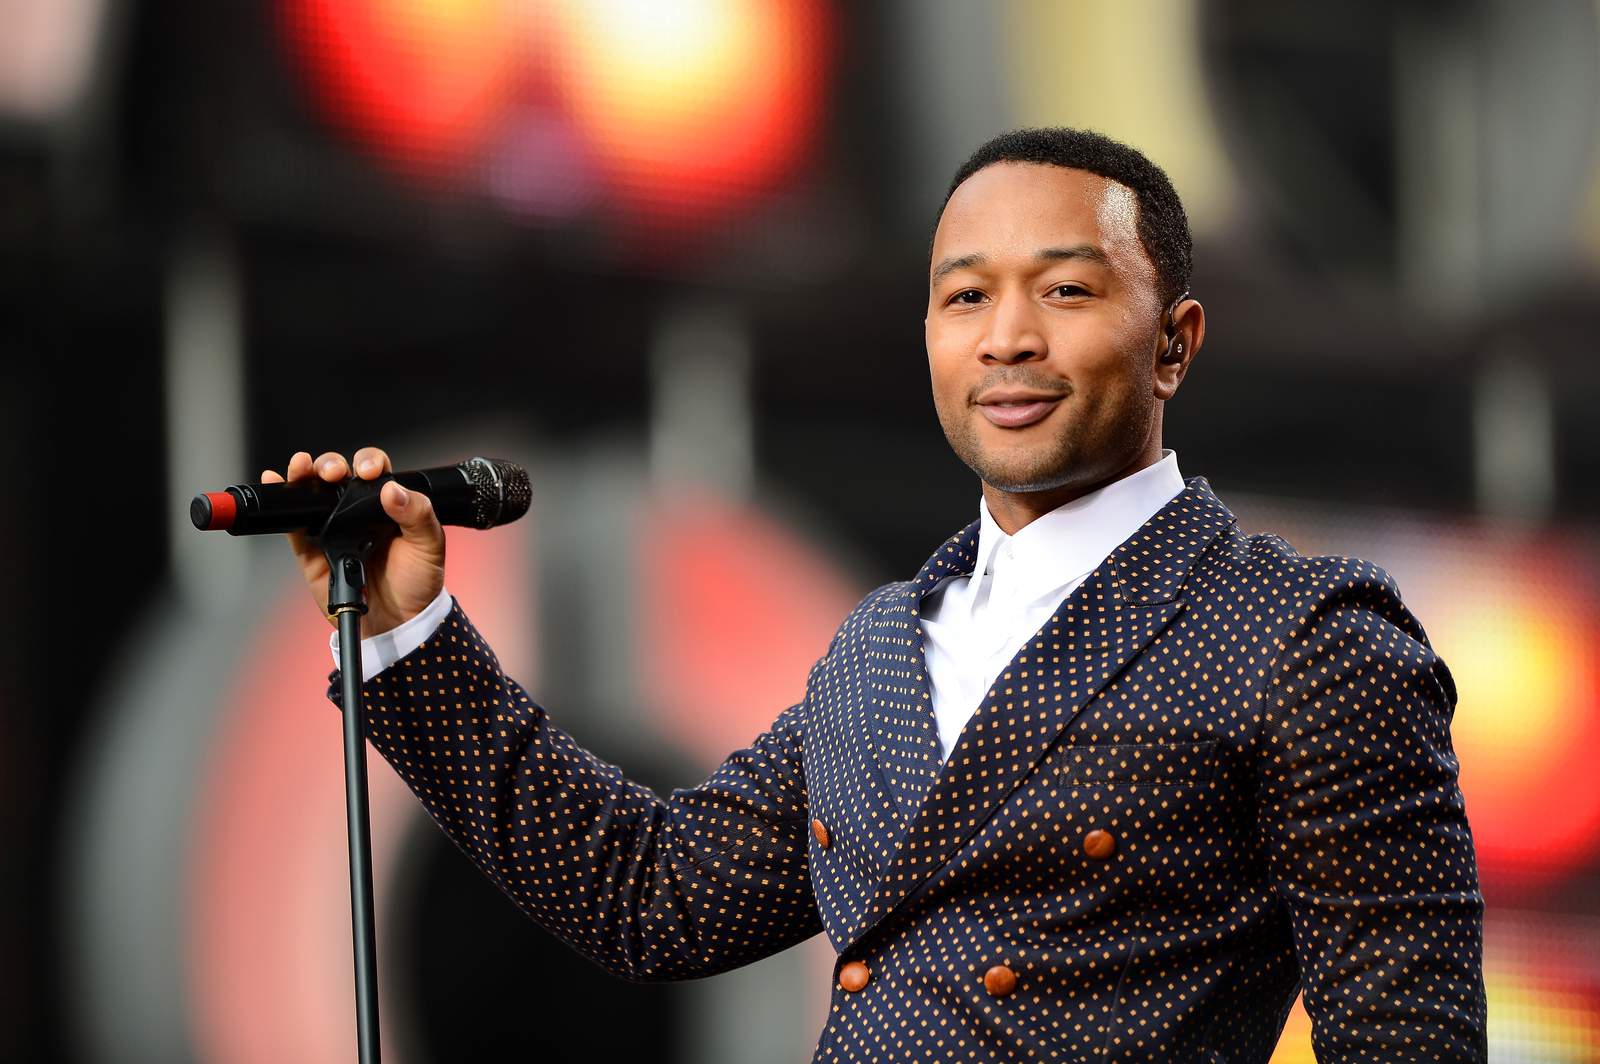 Musicians like John Legend, Neil Young performing virtual concerts for fans